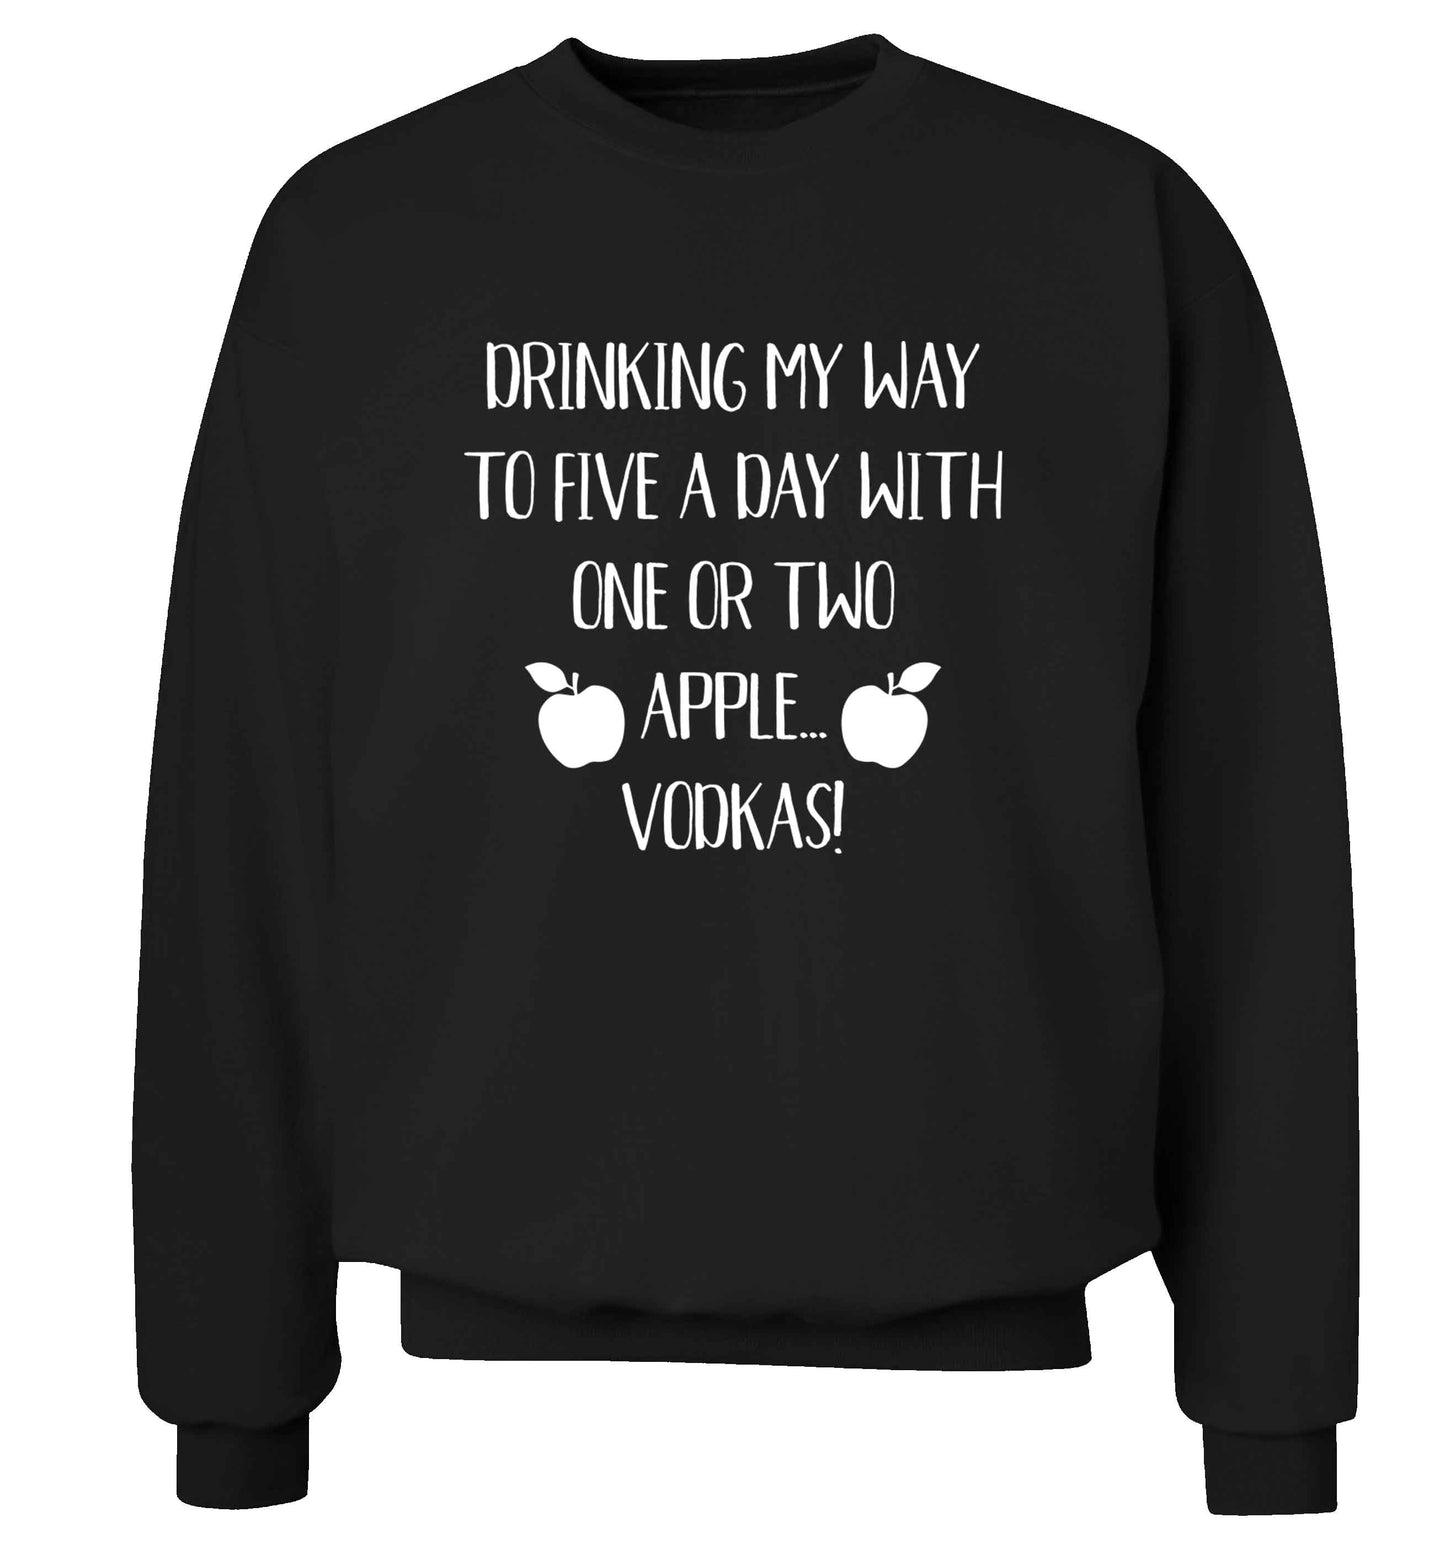 Drinking my way to five a day with one or two apple vodkas Adult's unisex black Sweater 2XL